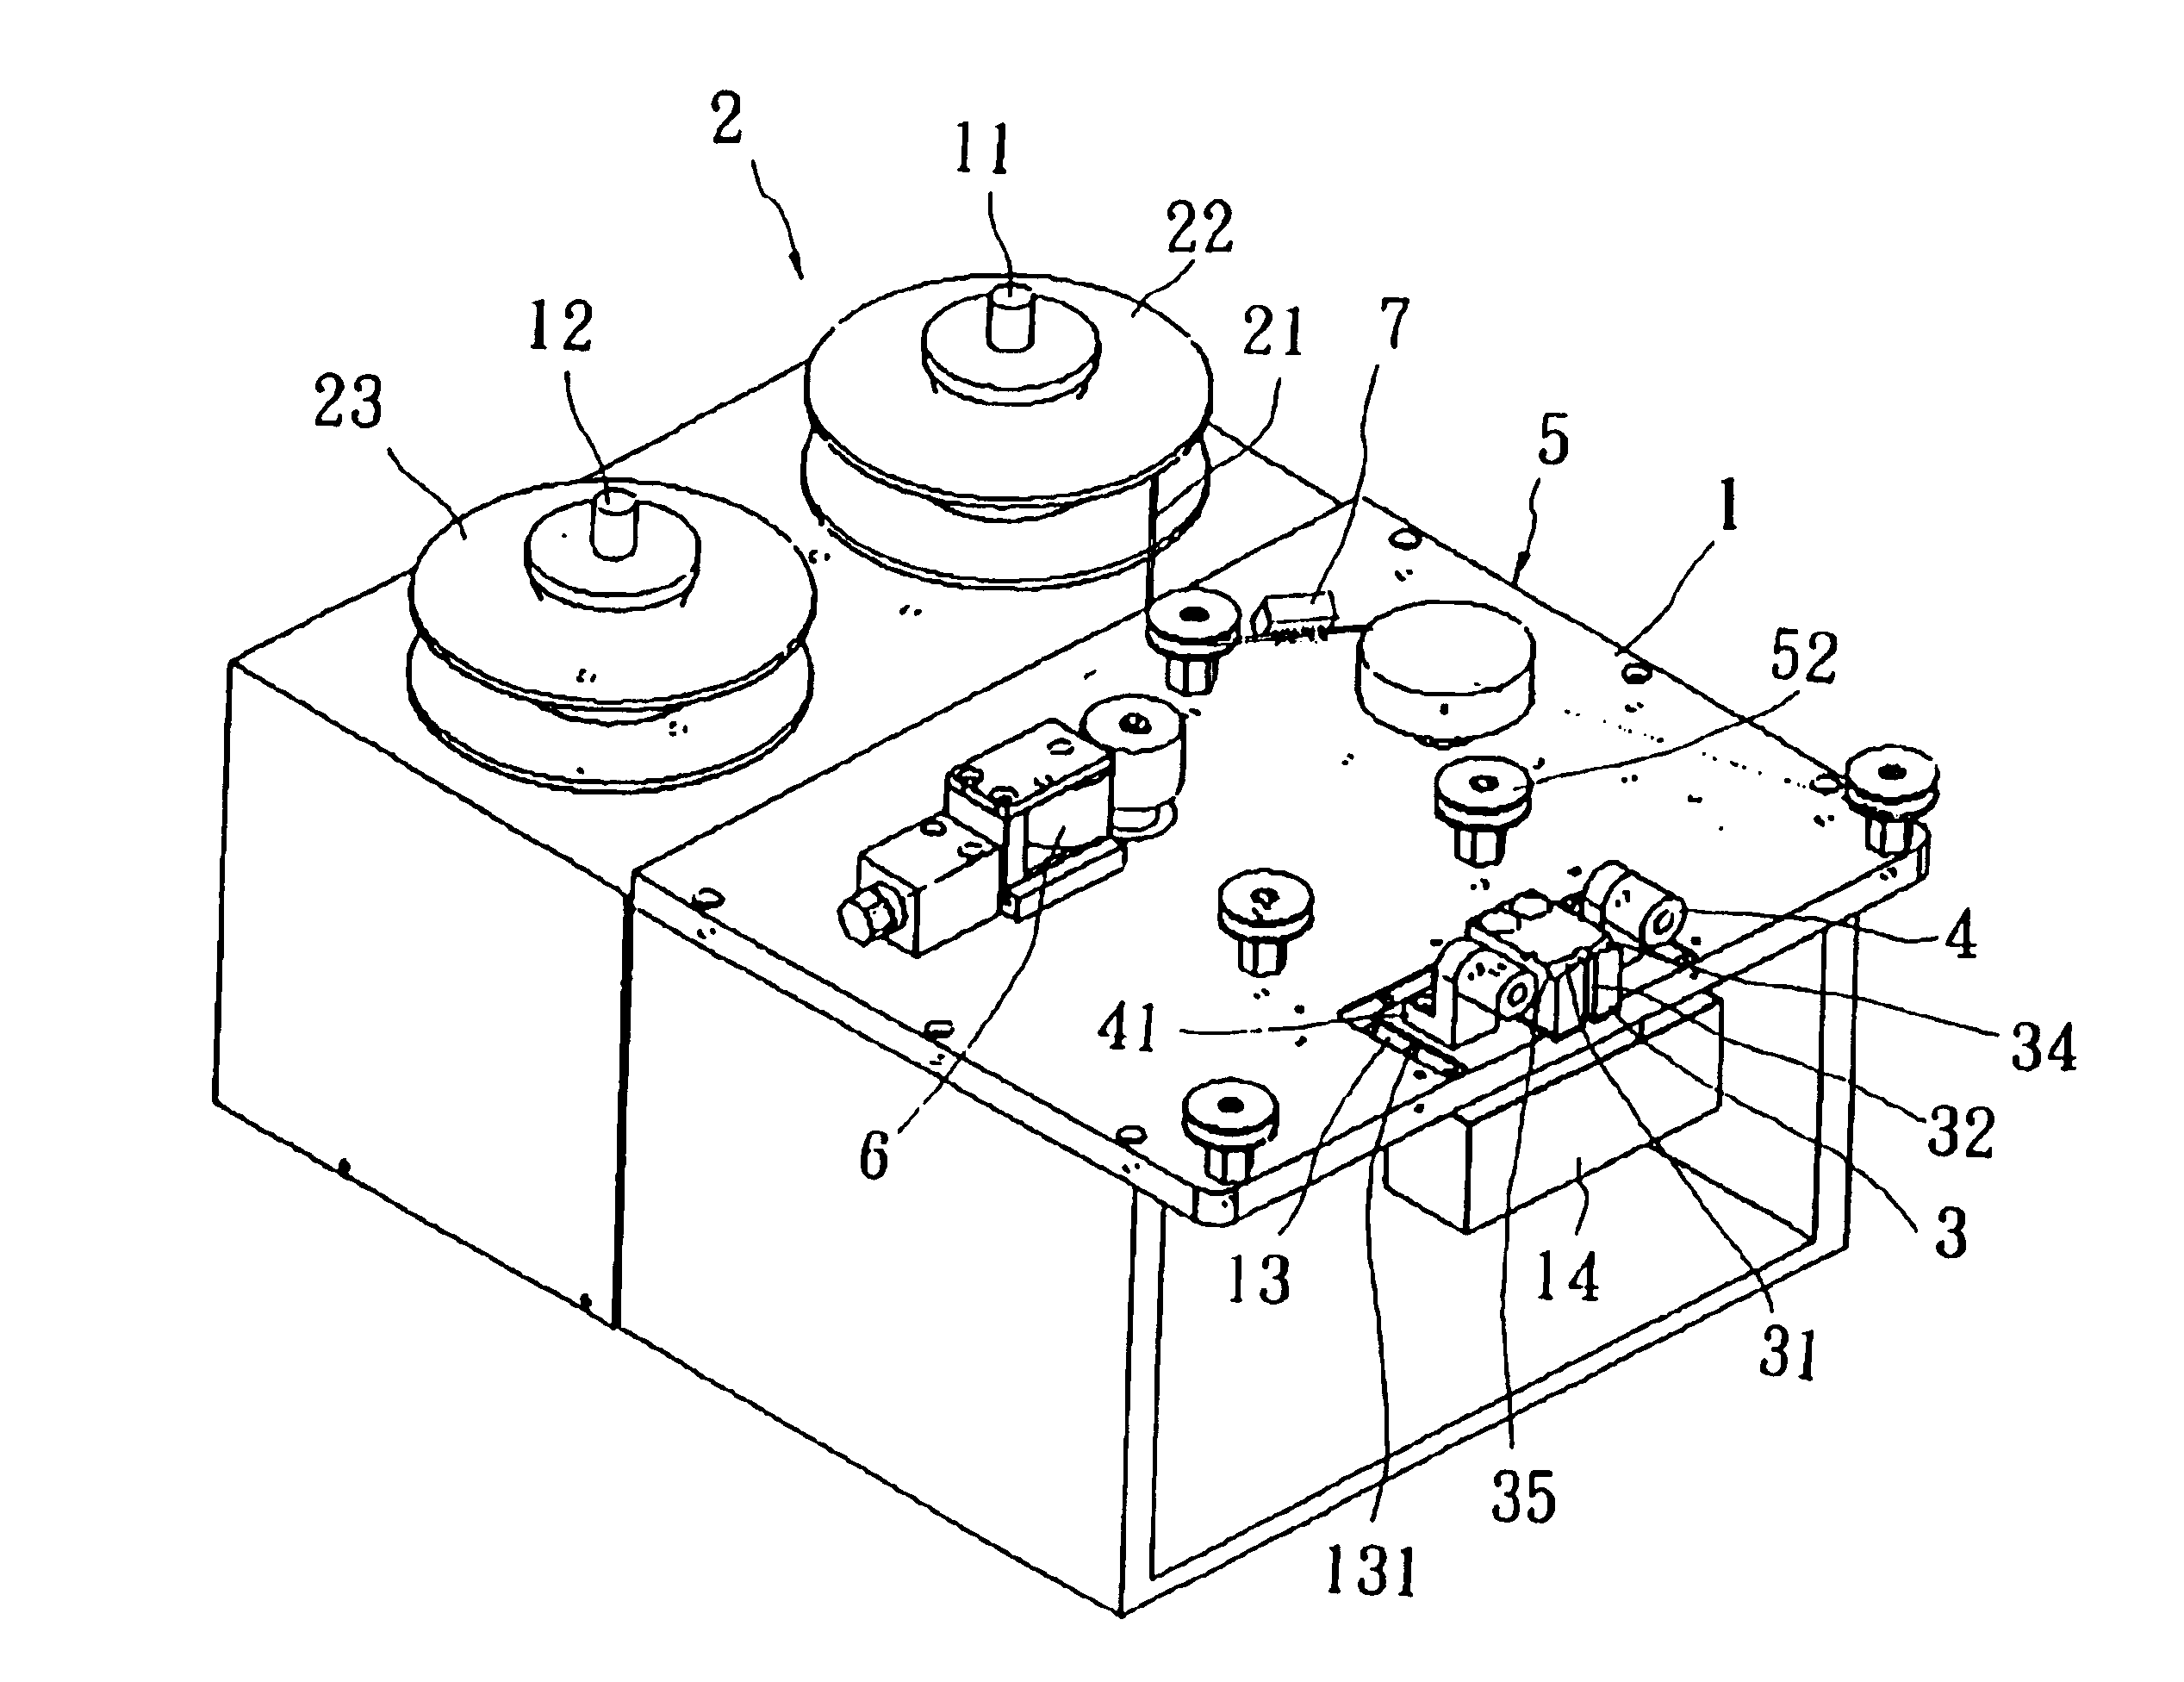 Microelectrode machining device